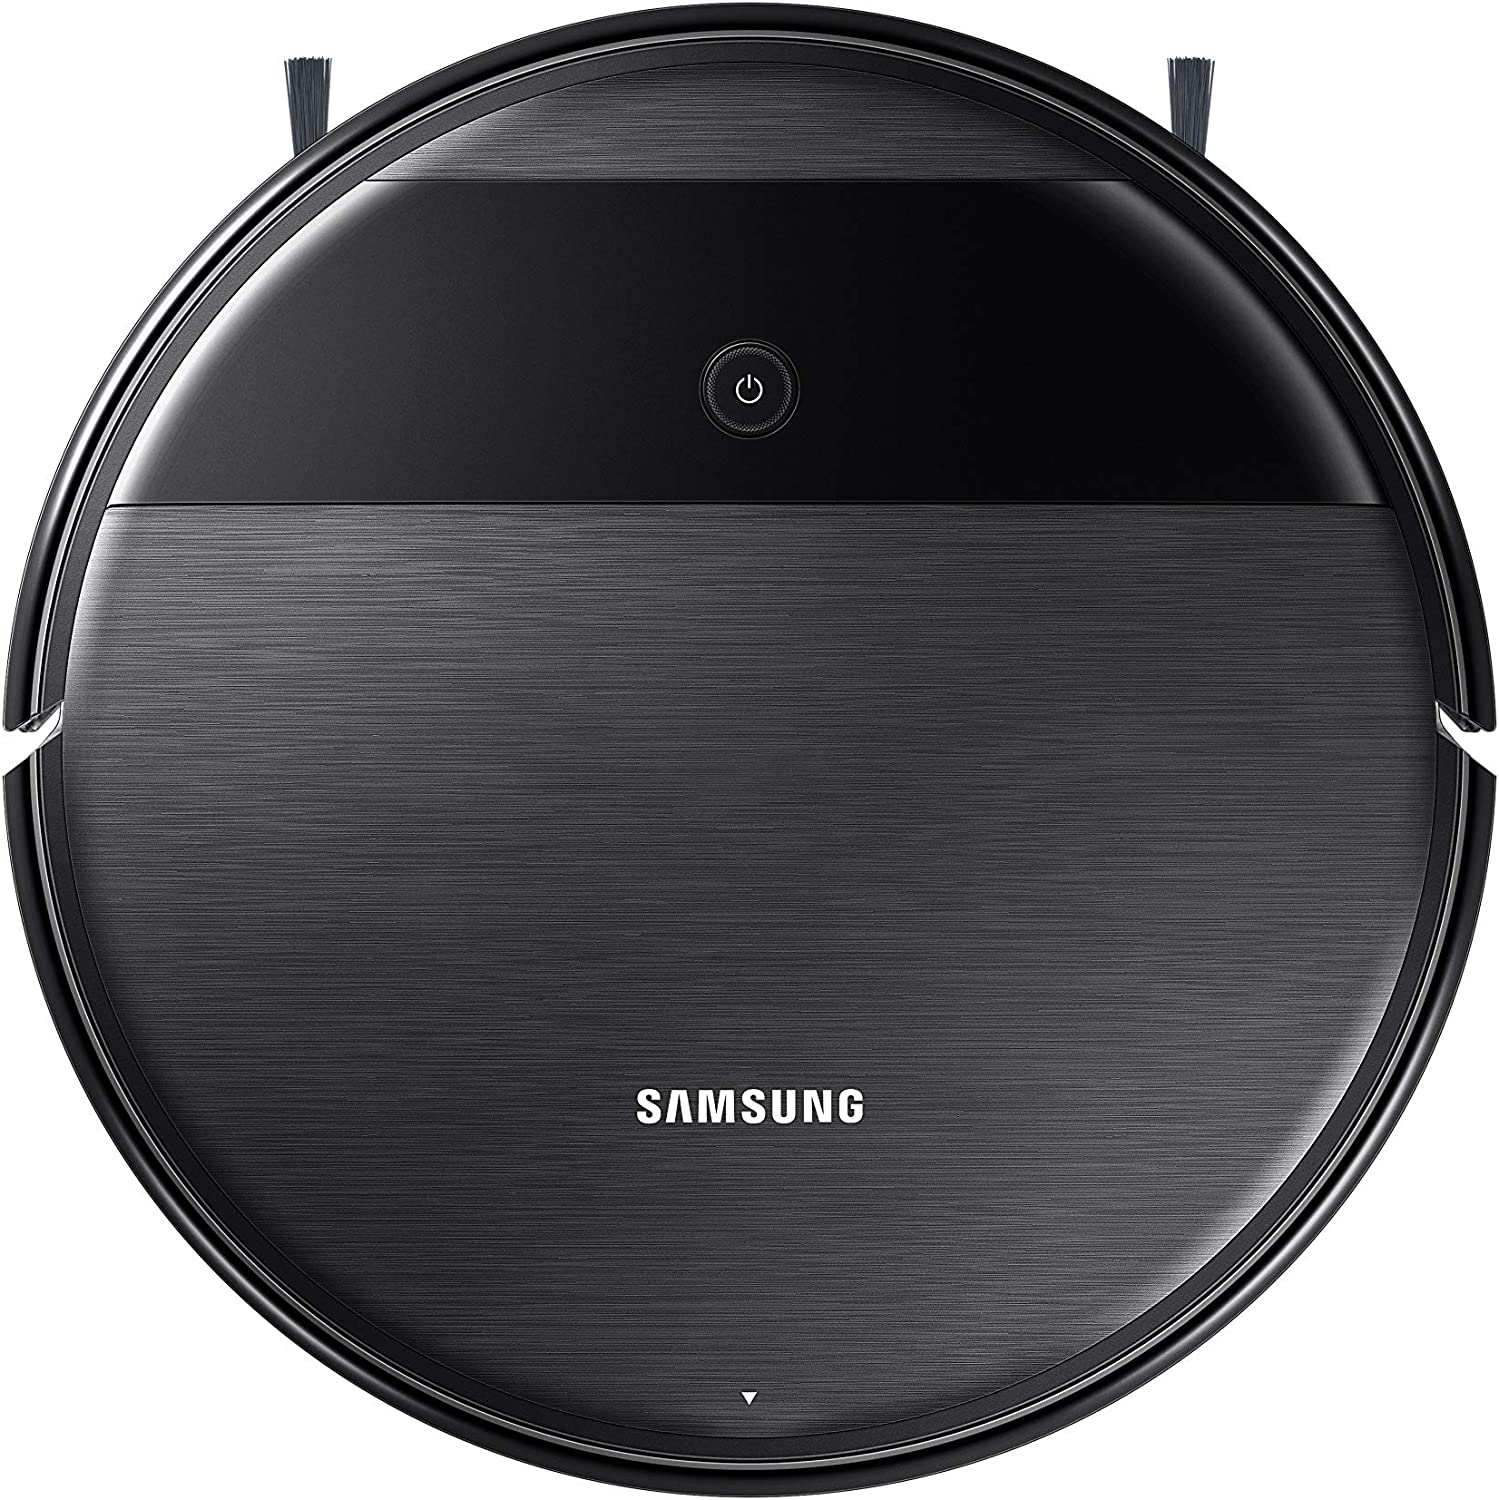 Samsung POWERbot VR05R5050WK in offerta Prime Day a 179,99 euro